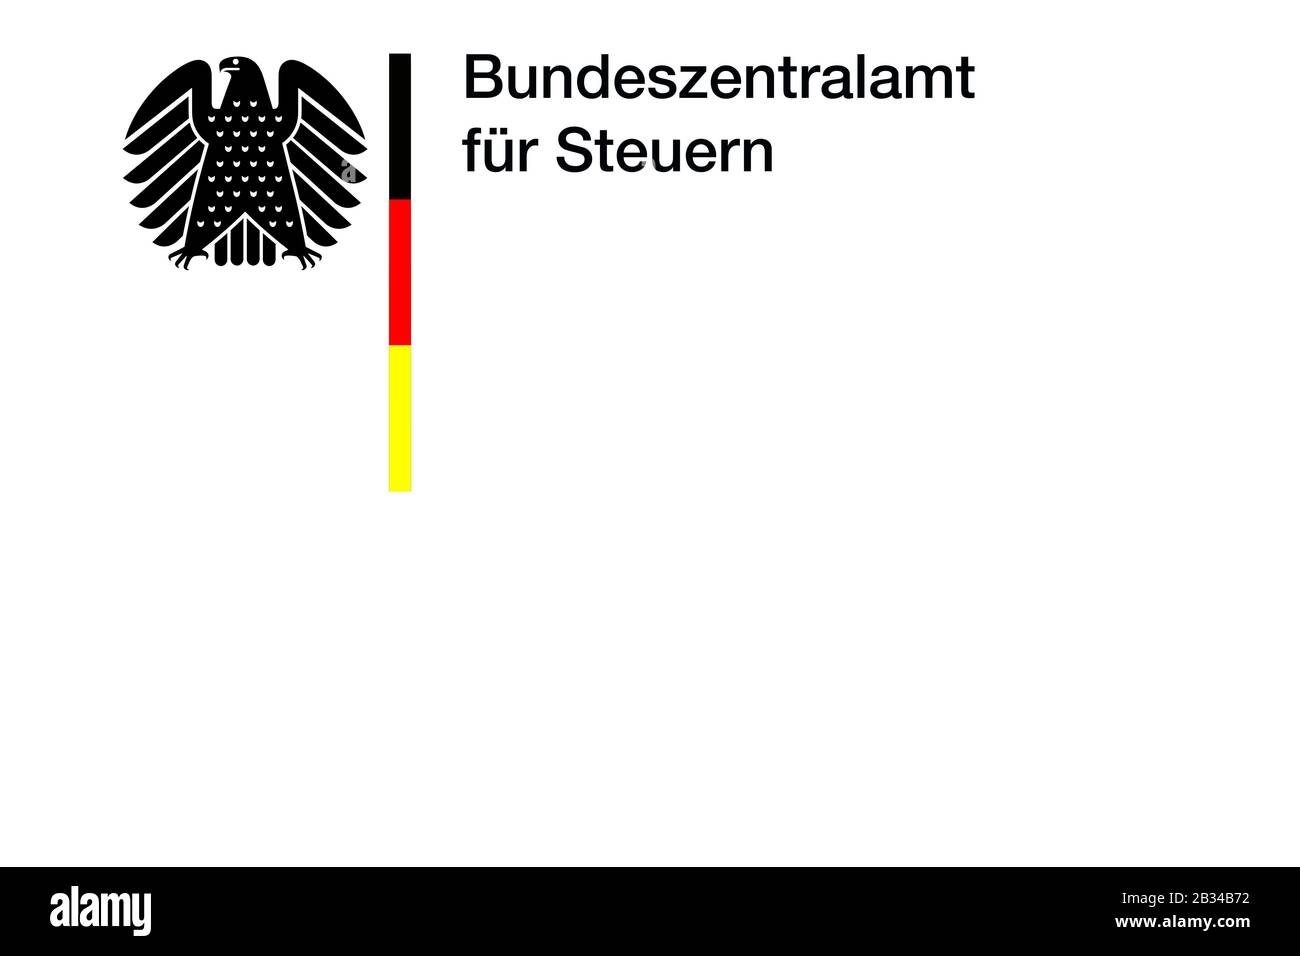 Bundeszentralamt fuer Steuern, Federal Central Tax Office, letterhead, Germany Stock Photo